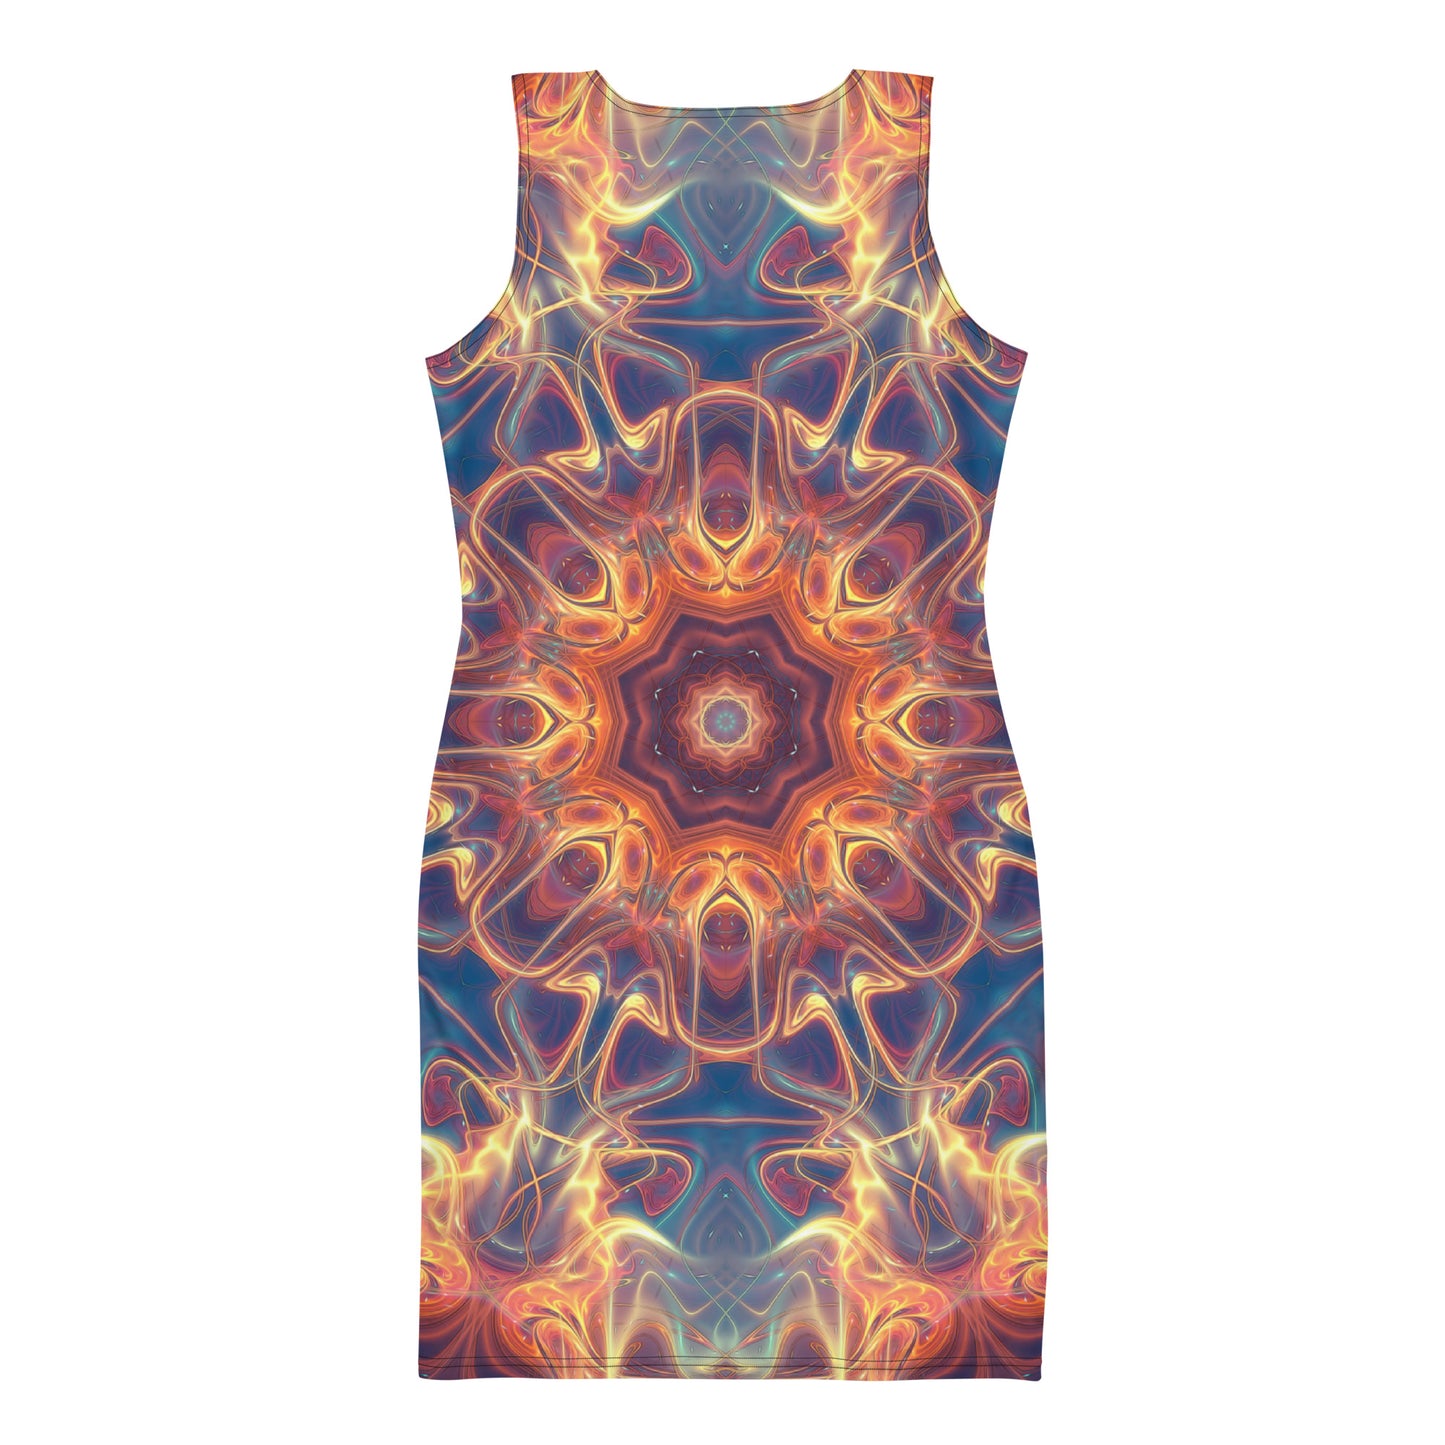 "Aquatic Rays" Bodycon FITTED DRESS